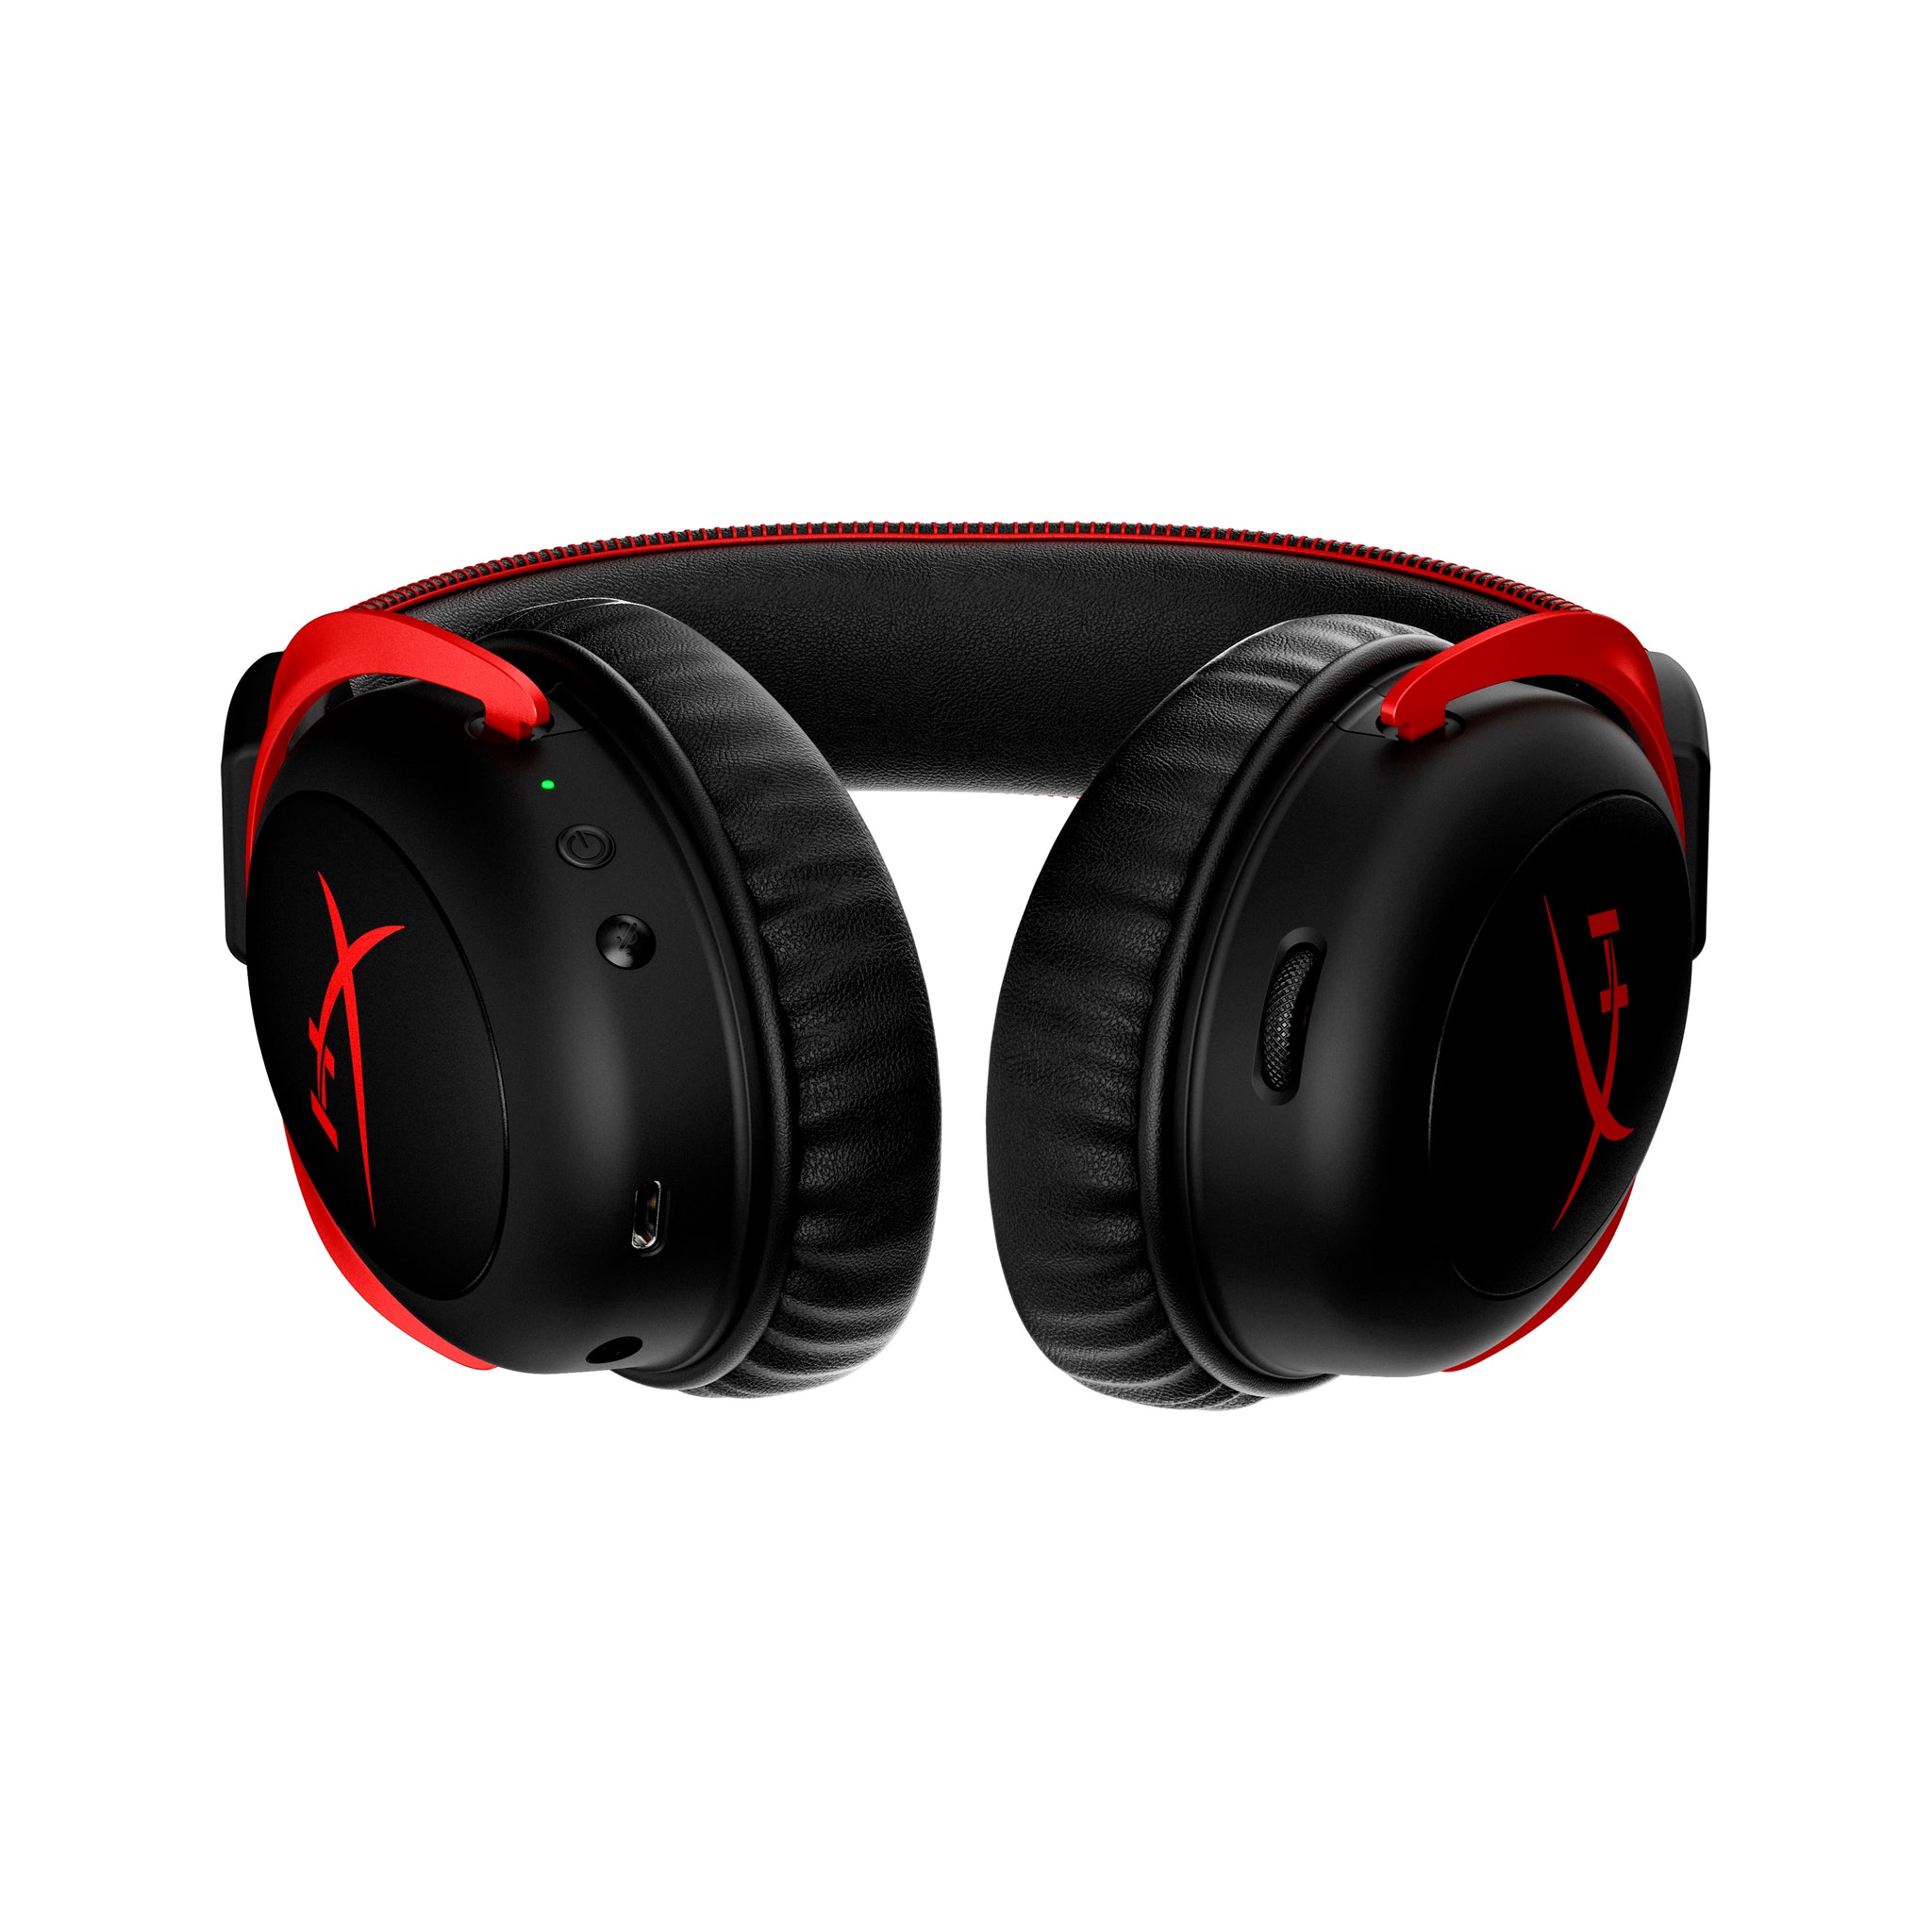 A view of the audio controls for power, volume, mic mute and mic monitoring on the base of the HyperX Cloud II wireless gaming headset